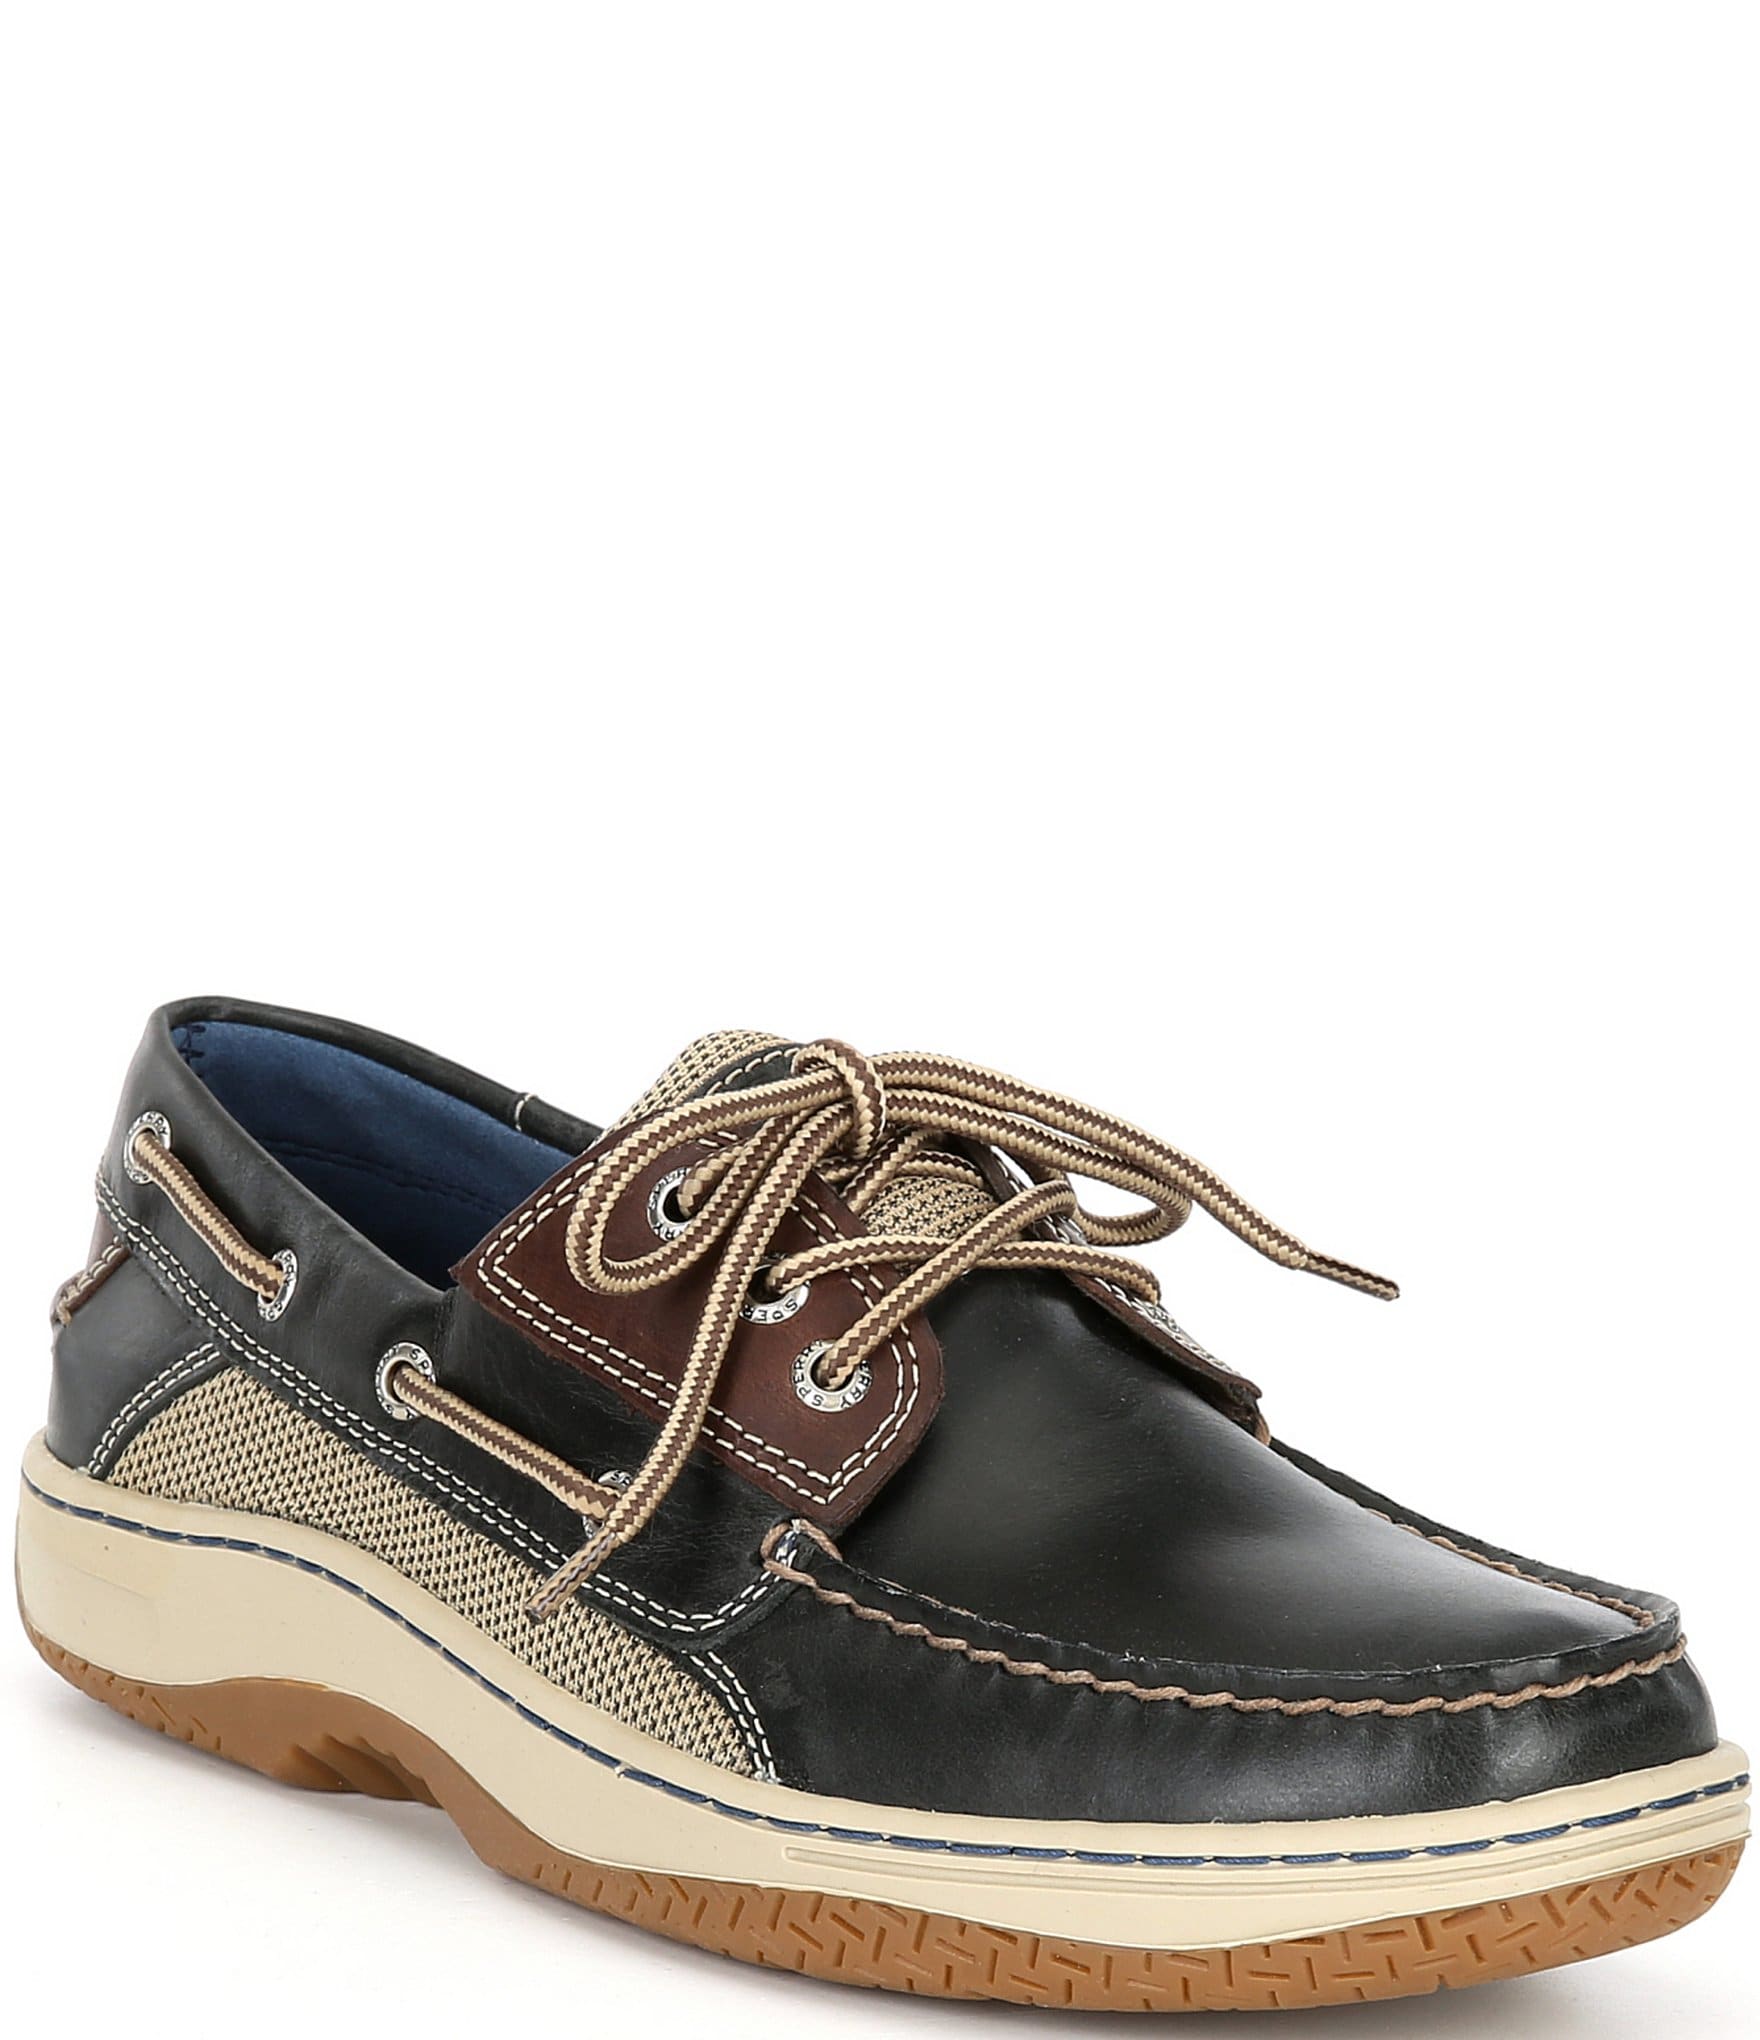 Sperry, Change or replace your shoe strings 